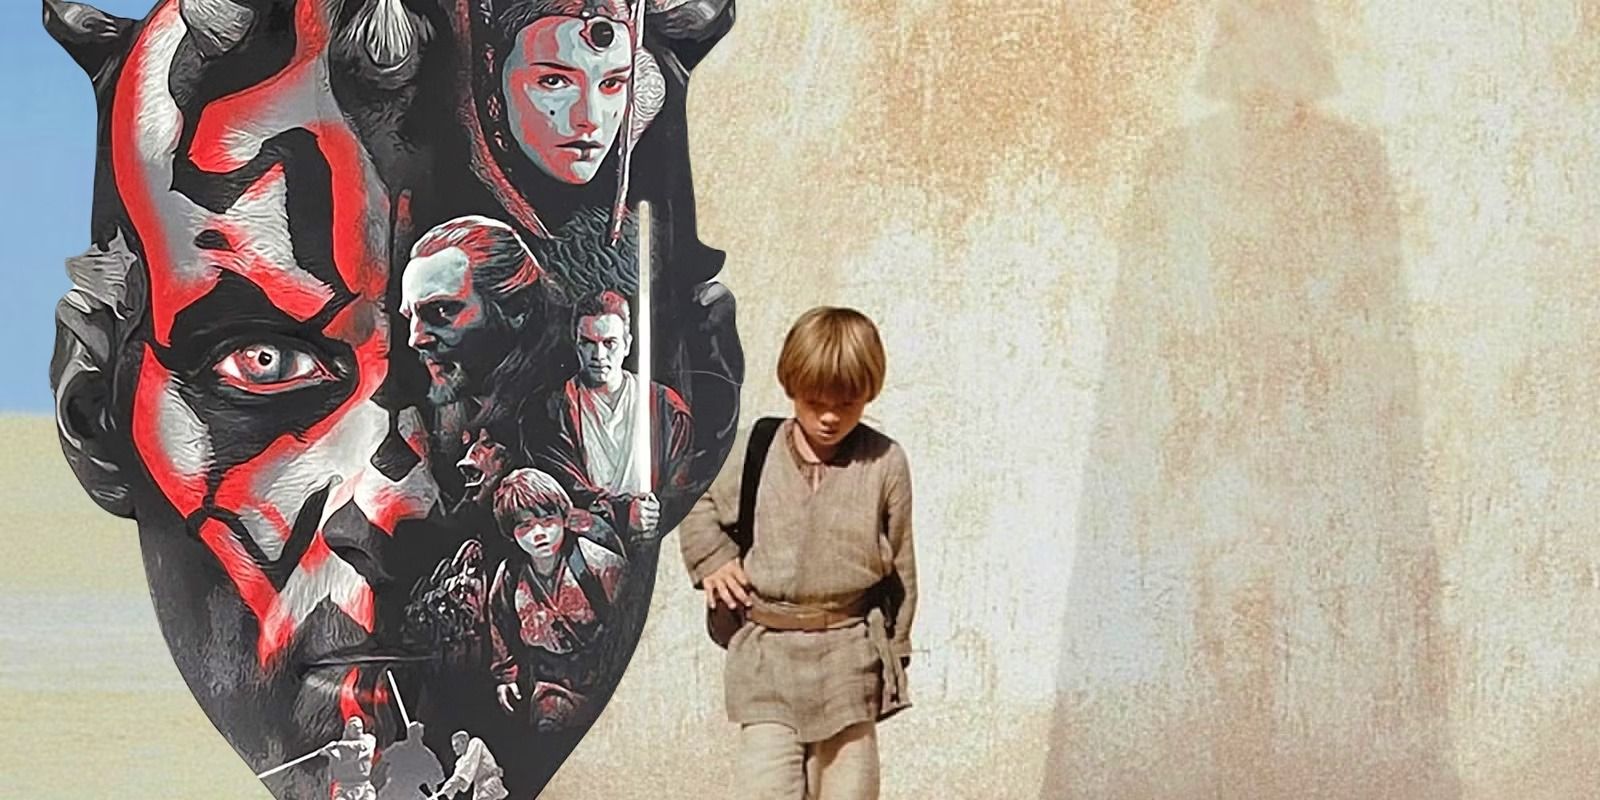 A combination image of the Phantom Menace poster of Anakin with a Vader shadow and an image of Darth Maul with many Phantom Menace characters to the left